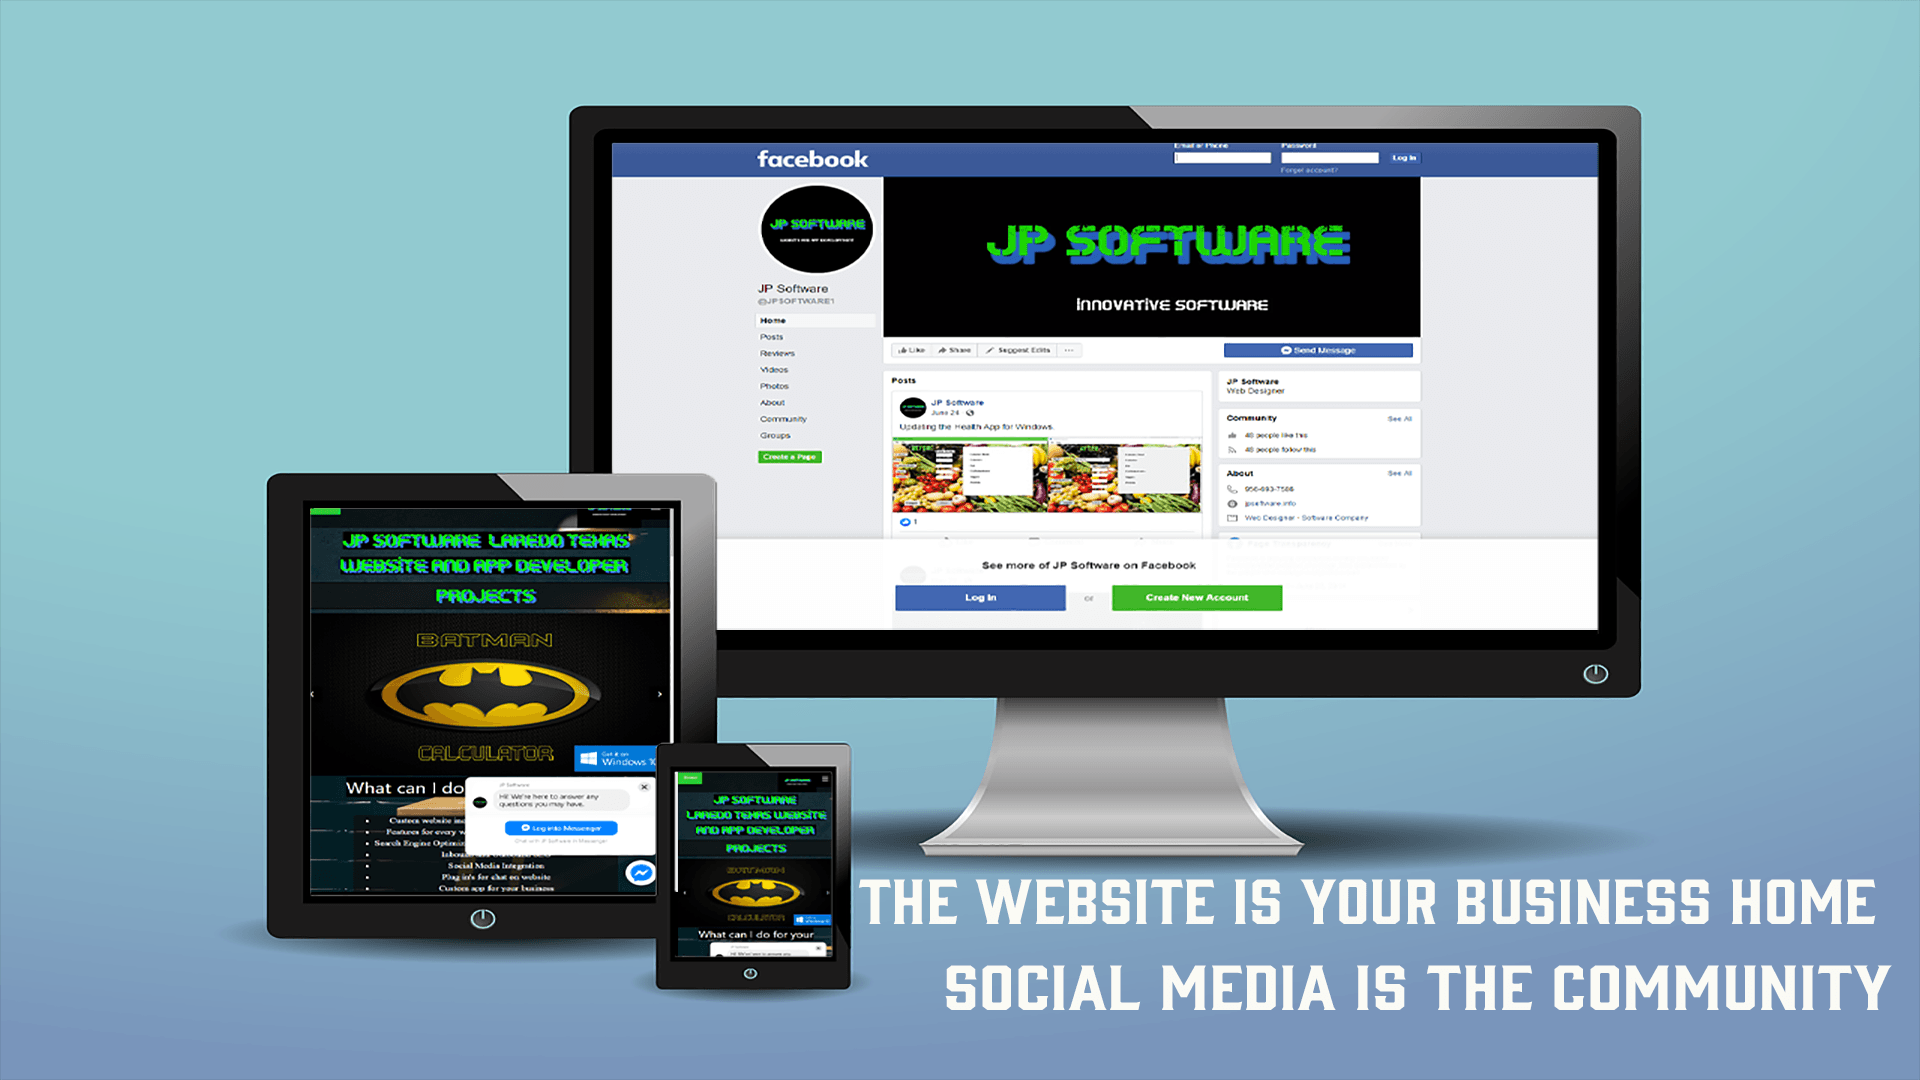 Website and Social Media. Monitor, Tablet, and Smartphone Image.